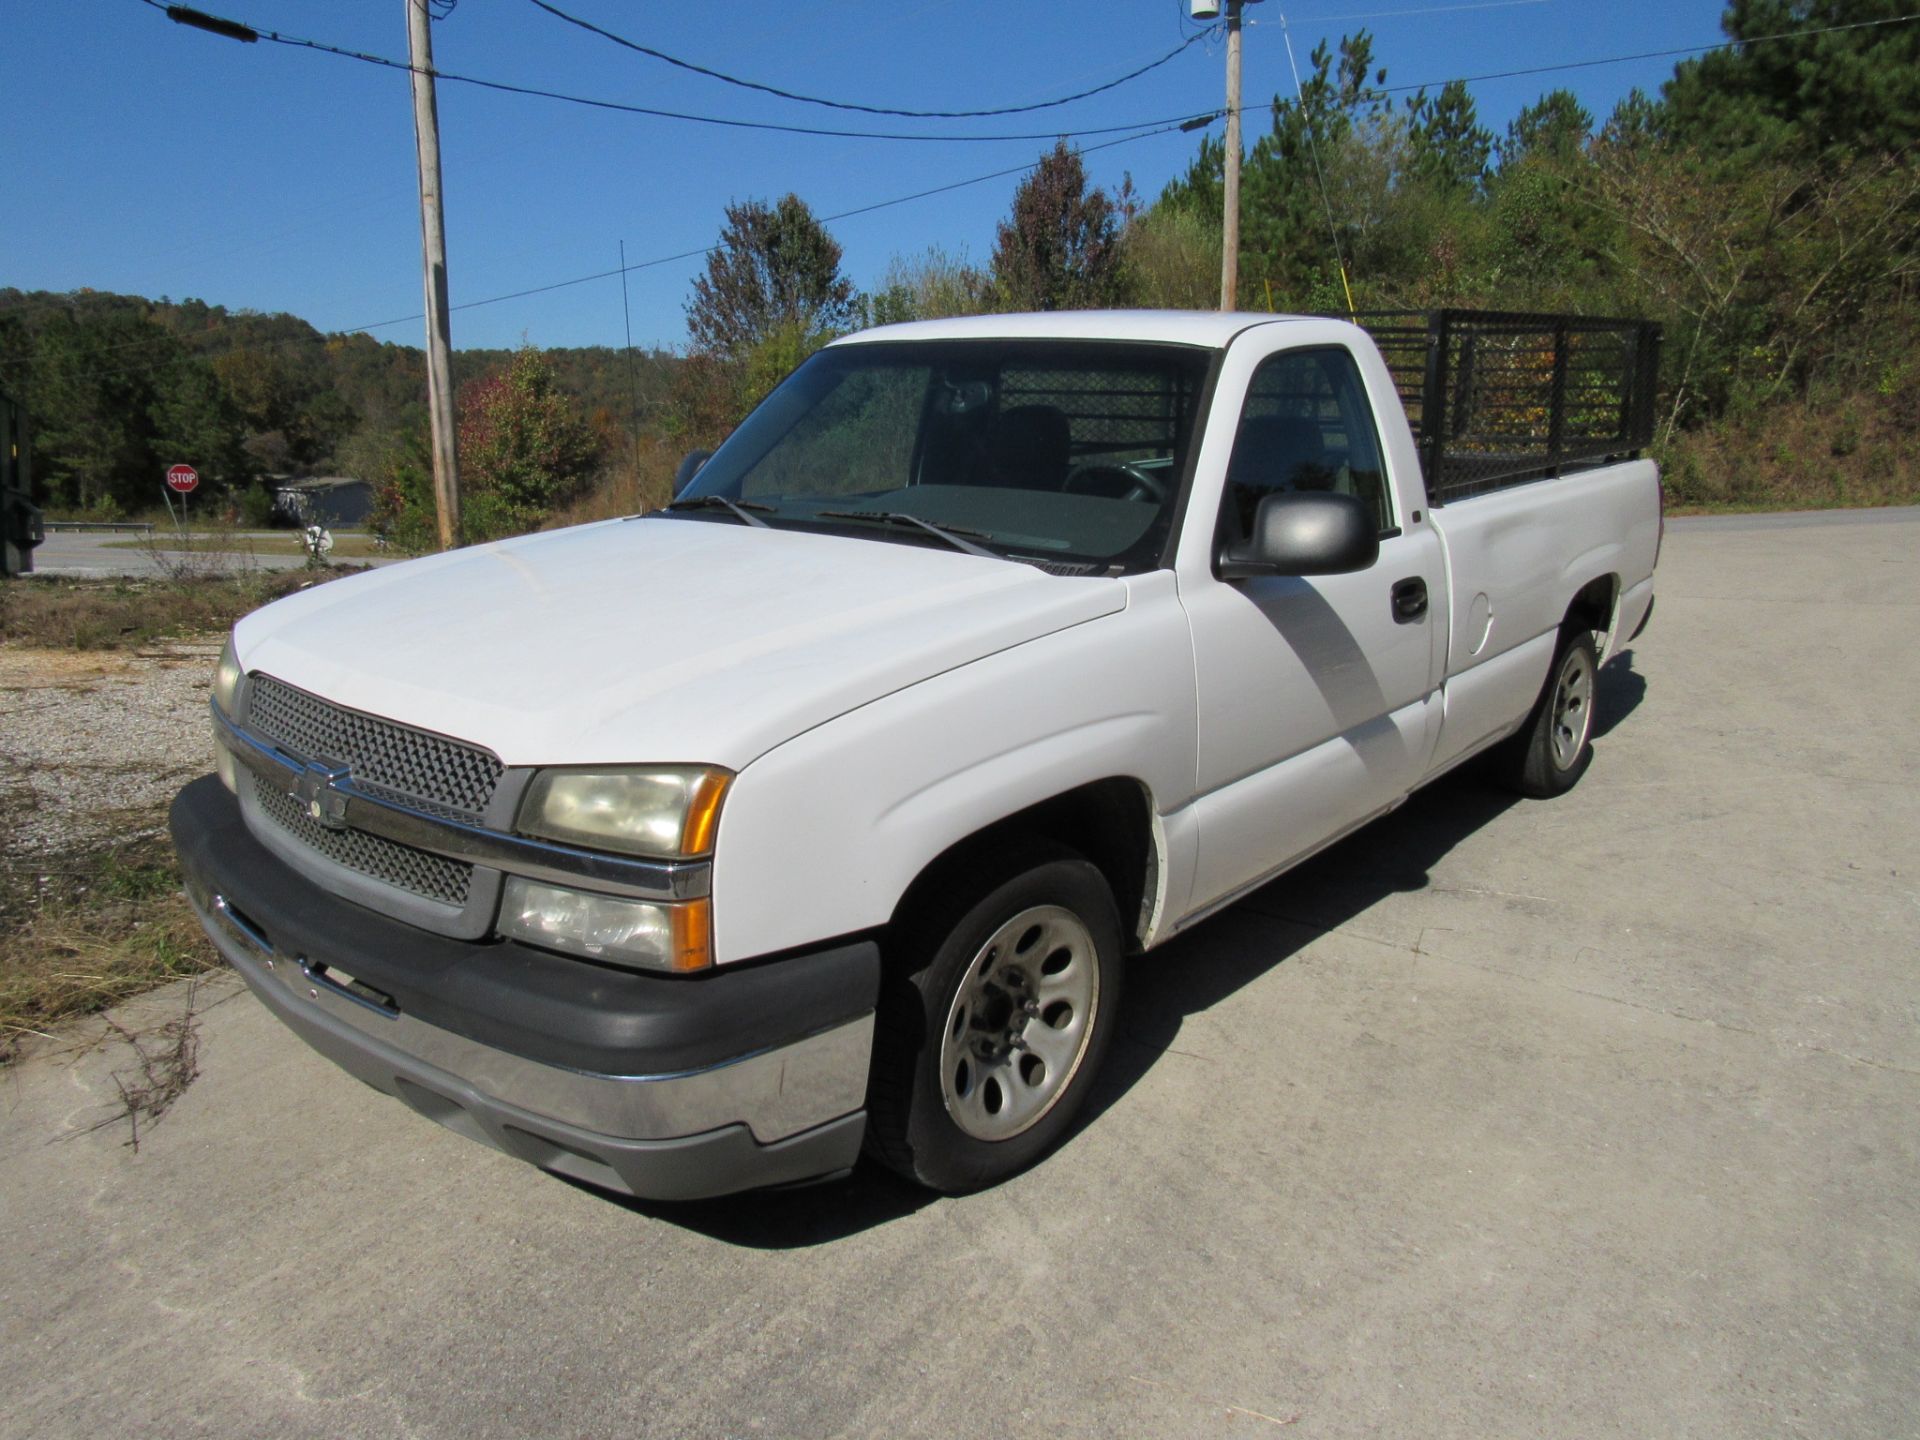 Chevrolet Silverado C150 Pick Up Truck with Work Safety Cage in Bed, vin:1GCEC14X152311849, mfg. - Image 3 of 7